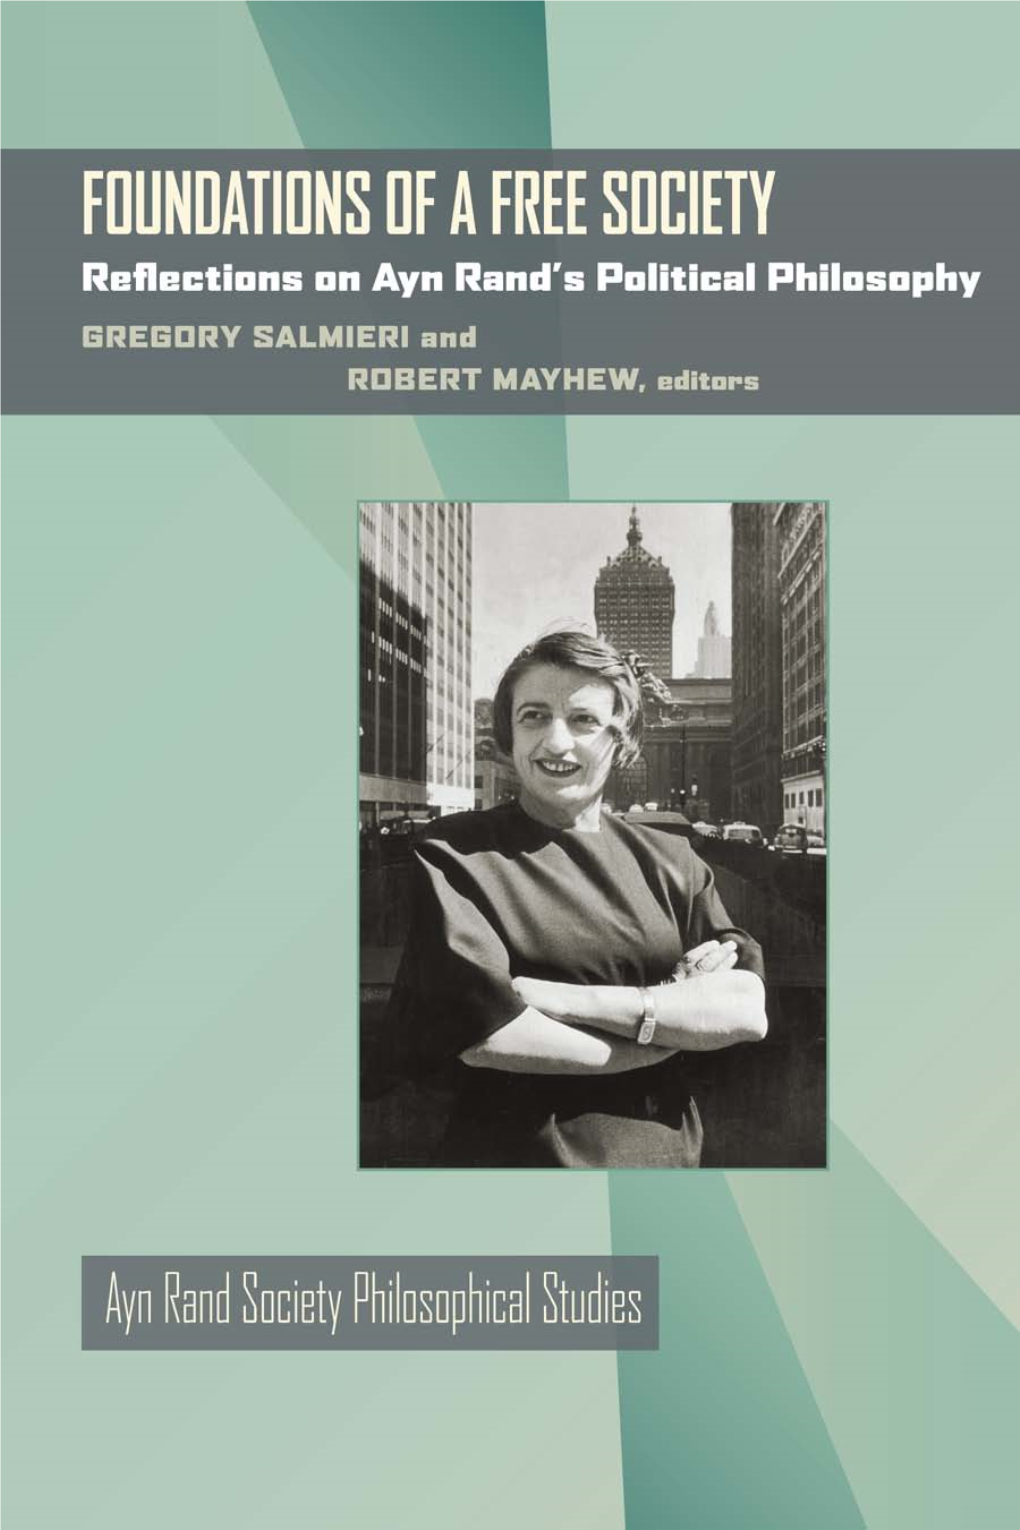 Foundations of a Free Society: Reflections on Ayn Rand's Political